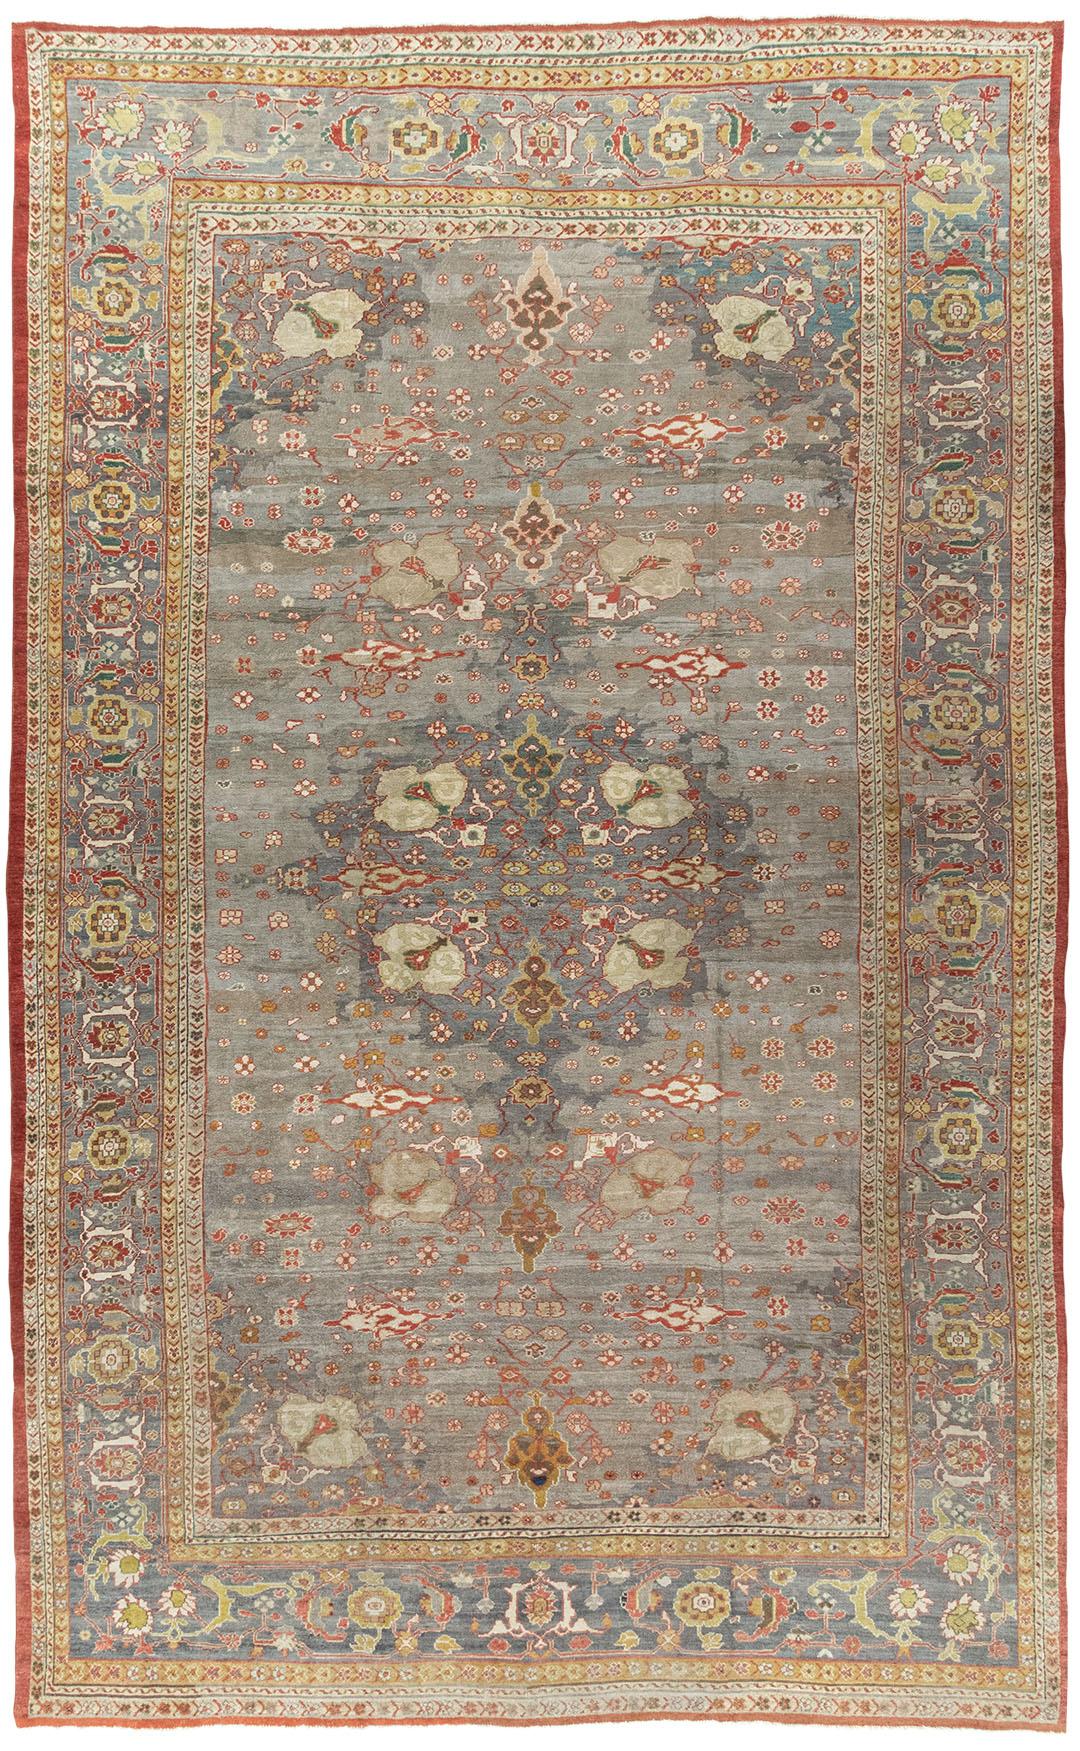 Vintage Persian Sultanabad rug 11'4 x 17'9. “Sultanabad” is one of those magical Oriental rug types, something to conjure with. There are real Sultanabad's, of which this is one, those moderately coarse carpets woven in the Sultanabad/ Arak